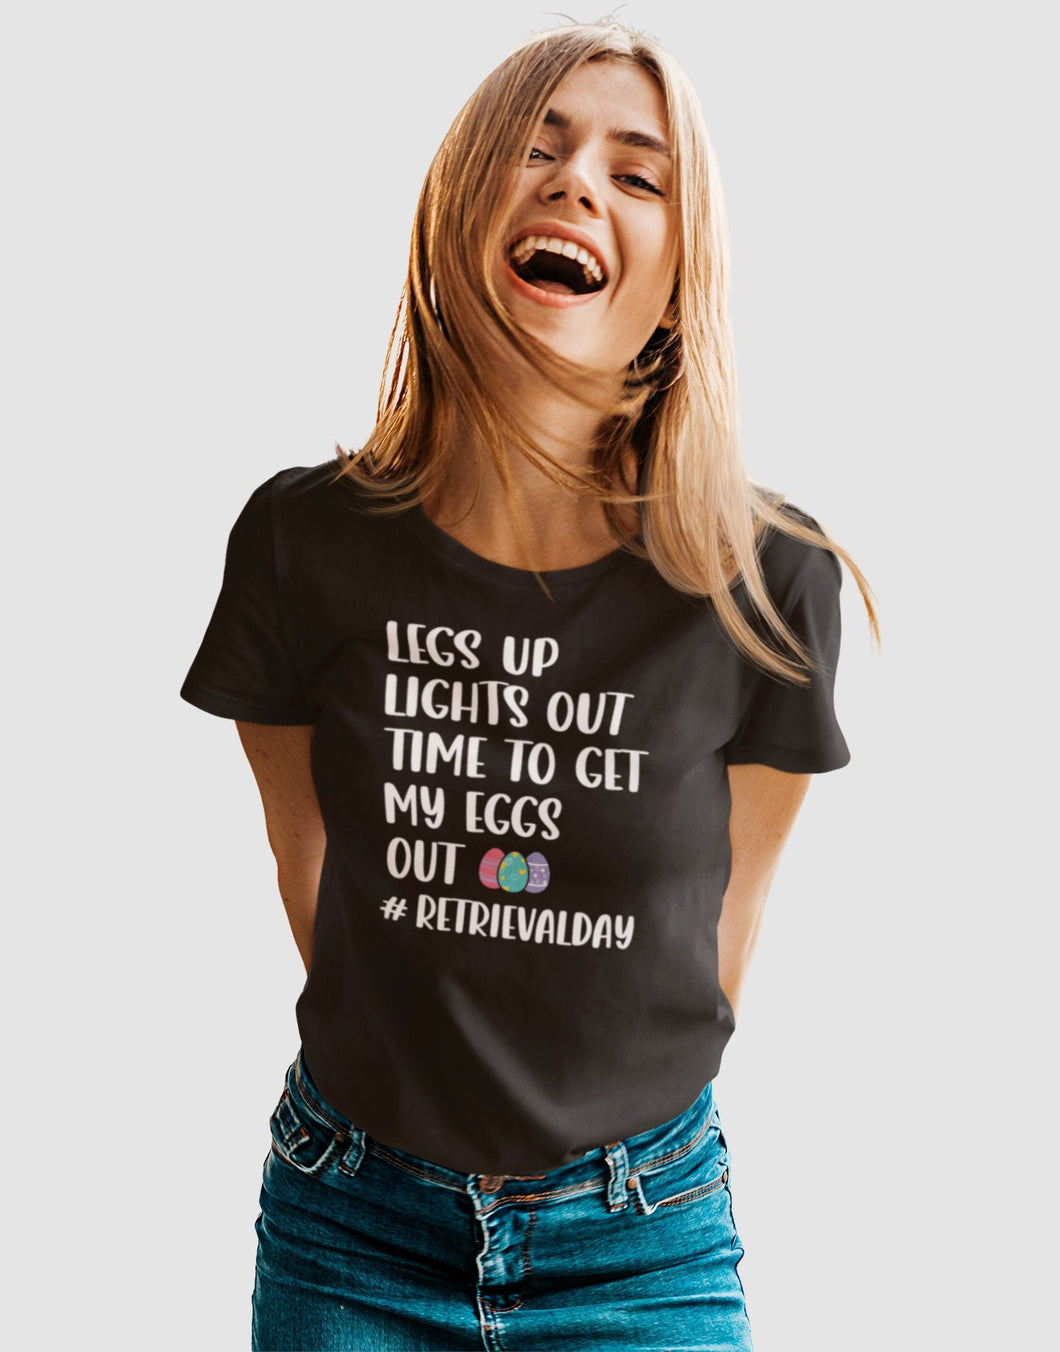 Legs Up Lights Out time To Get My Eggs Out, Surrogate Shirt, Surrogacy Shirt, IVF Shirt